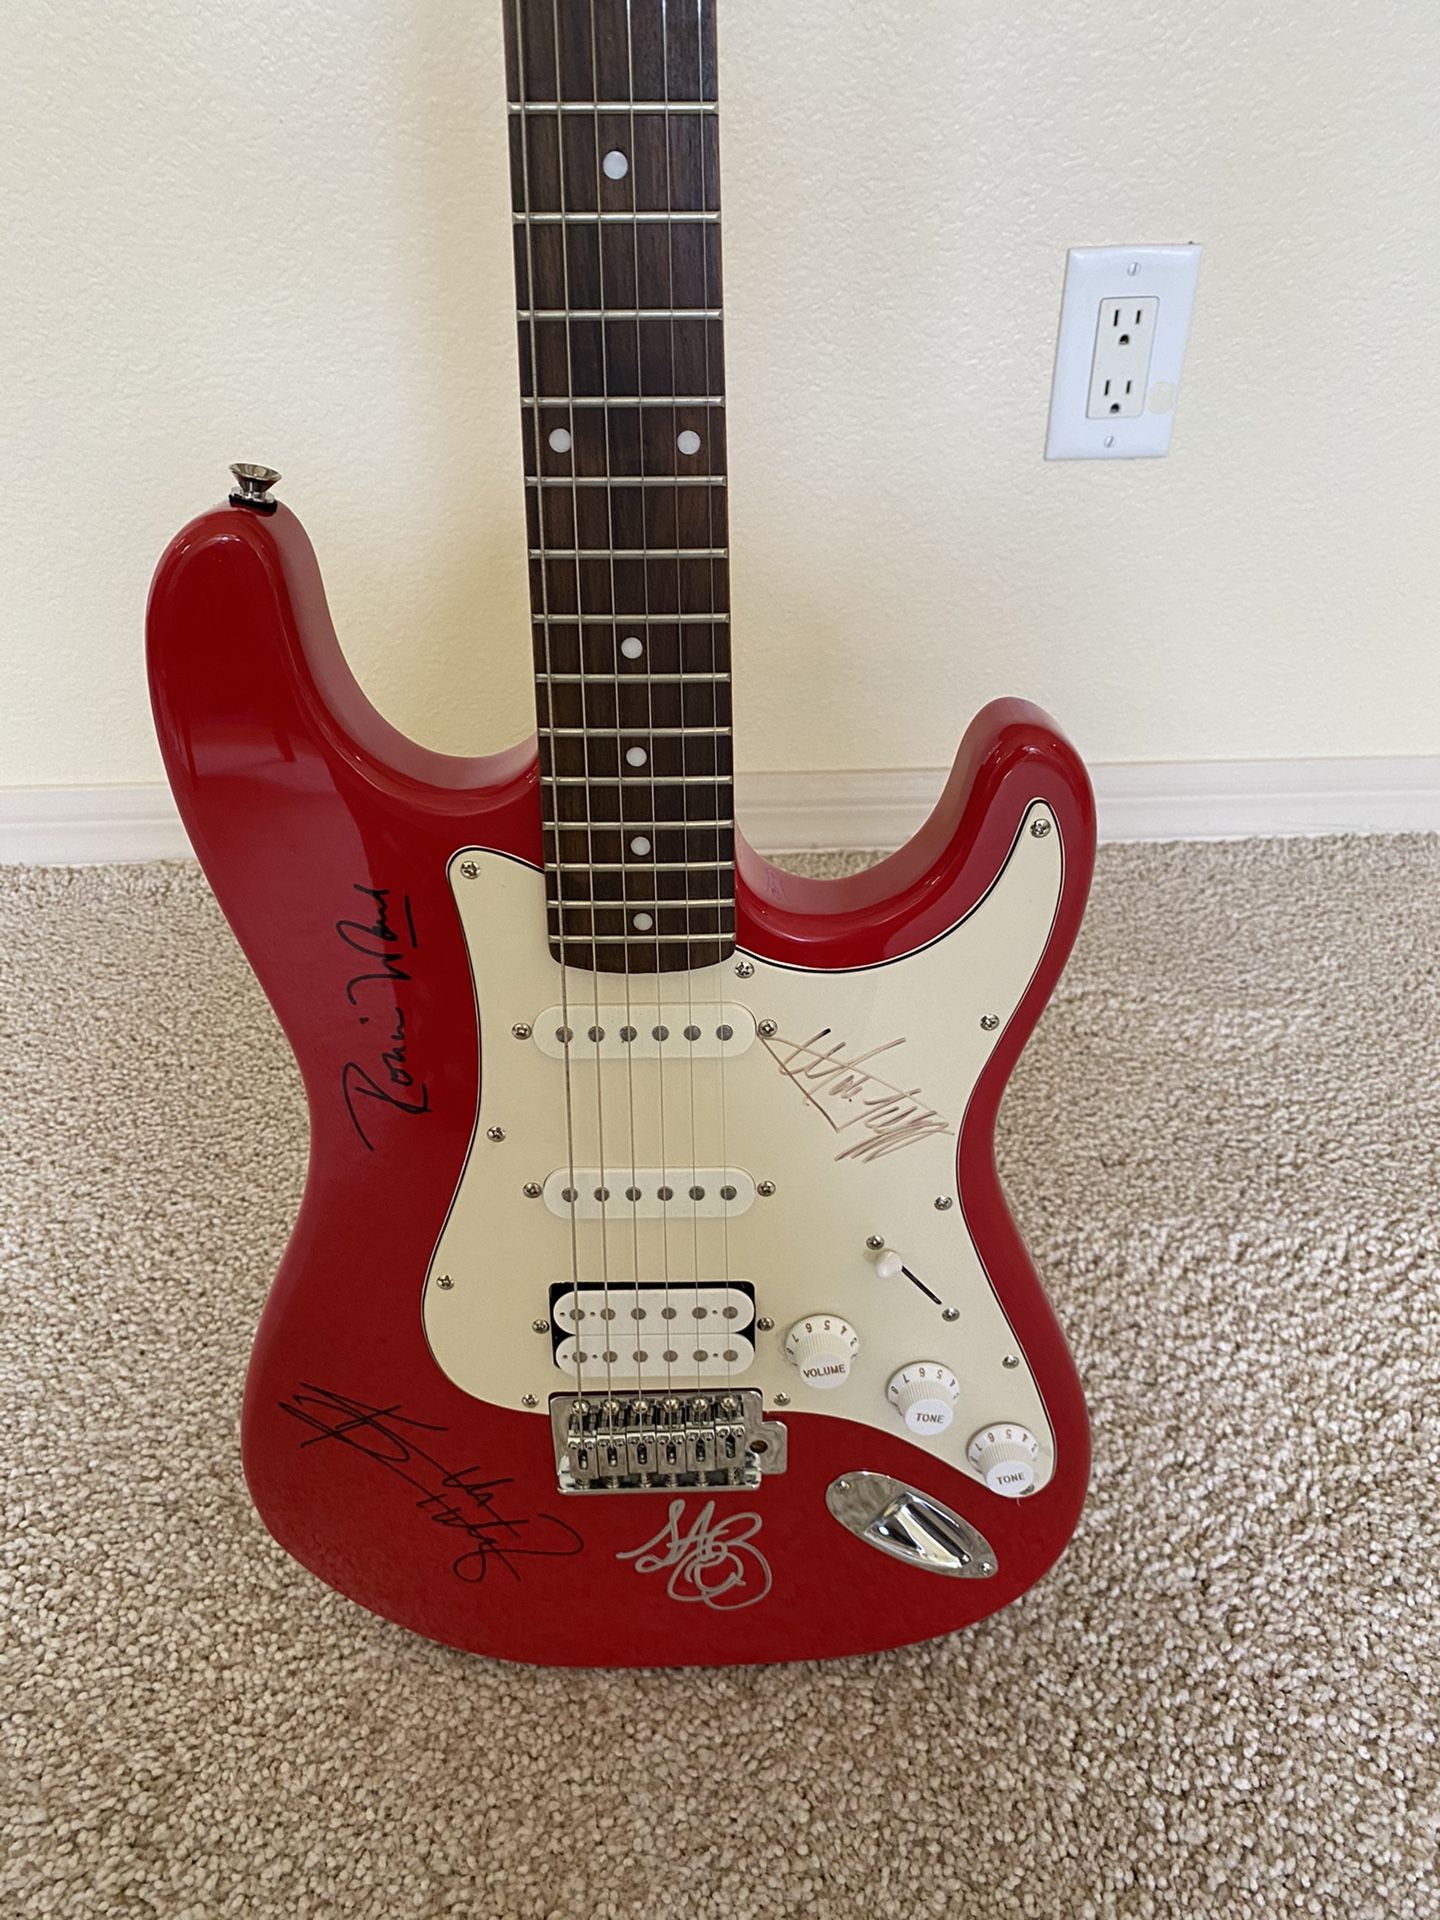 Rolling Stones signed guitar